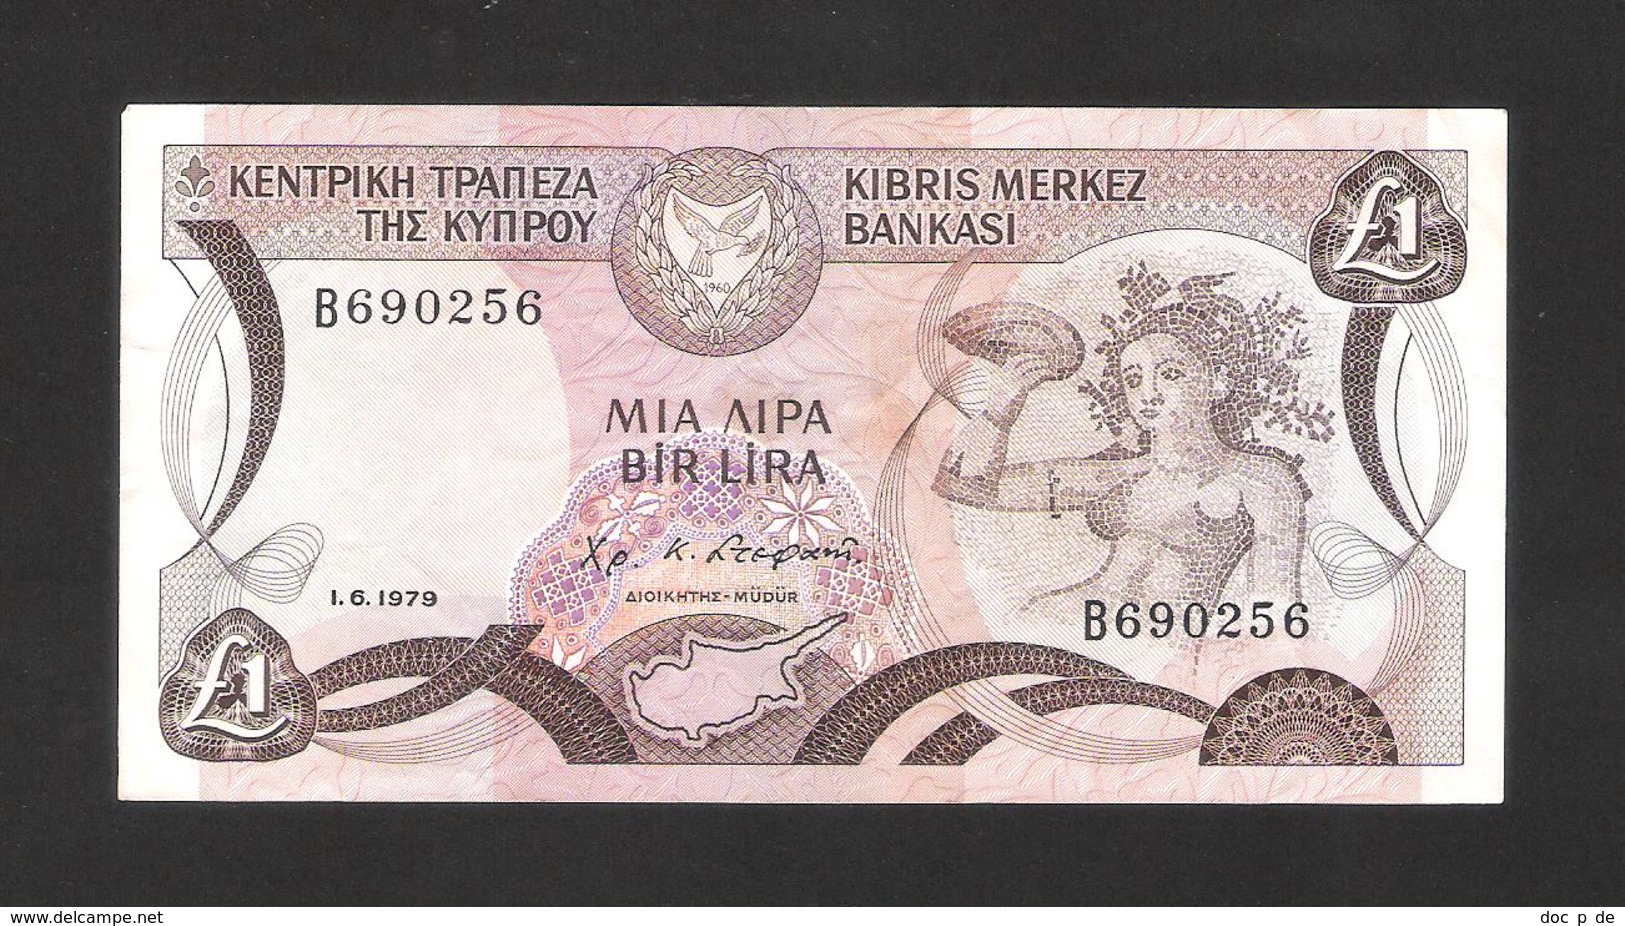 Zypern - Cyprus - Chypre - 1 Pounds - 1.6.1979 - Good Used Condition - Chypre